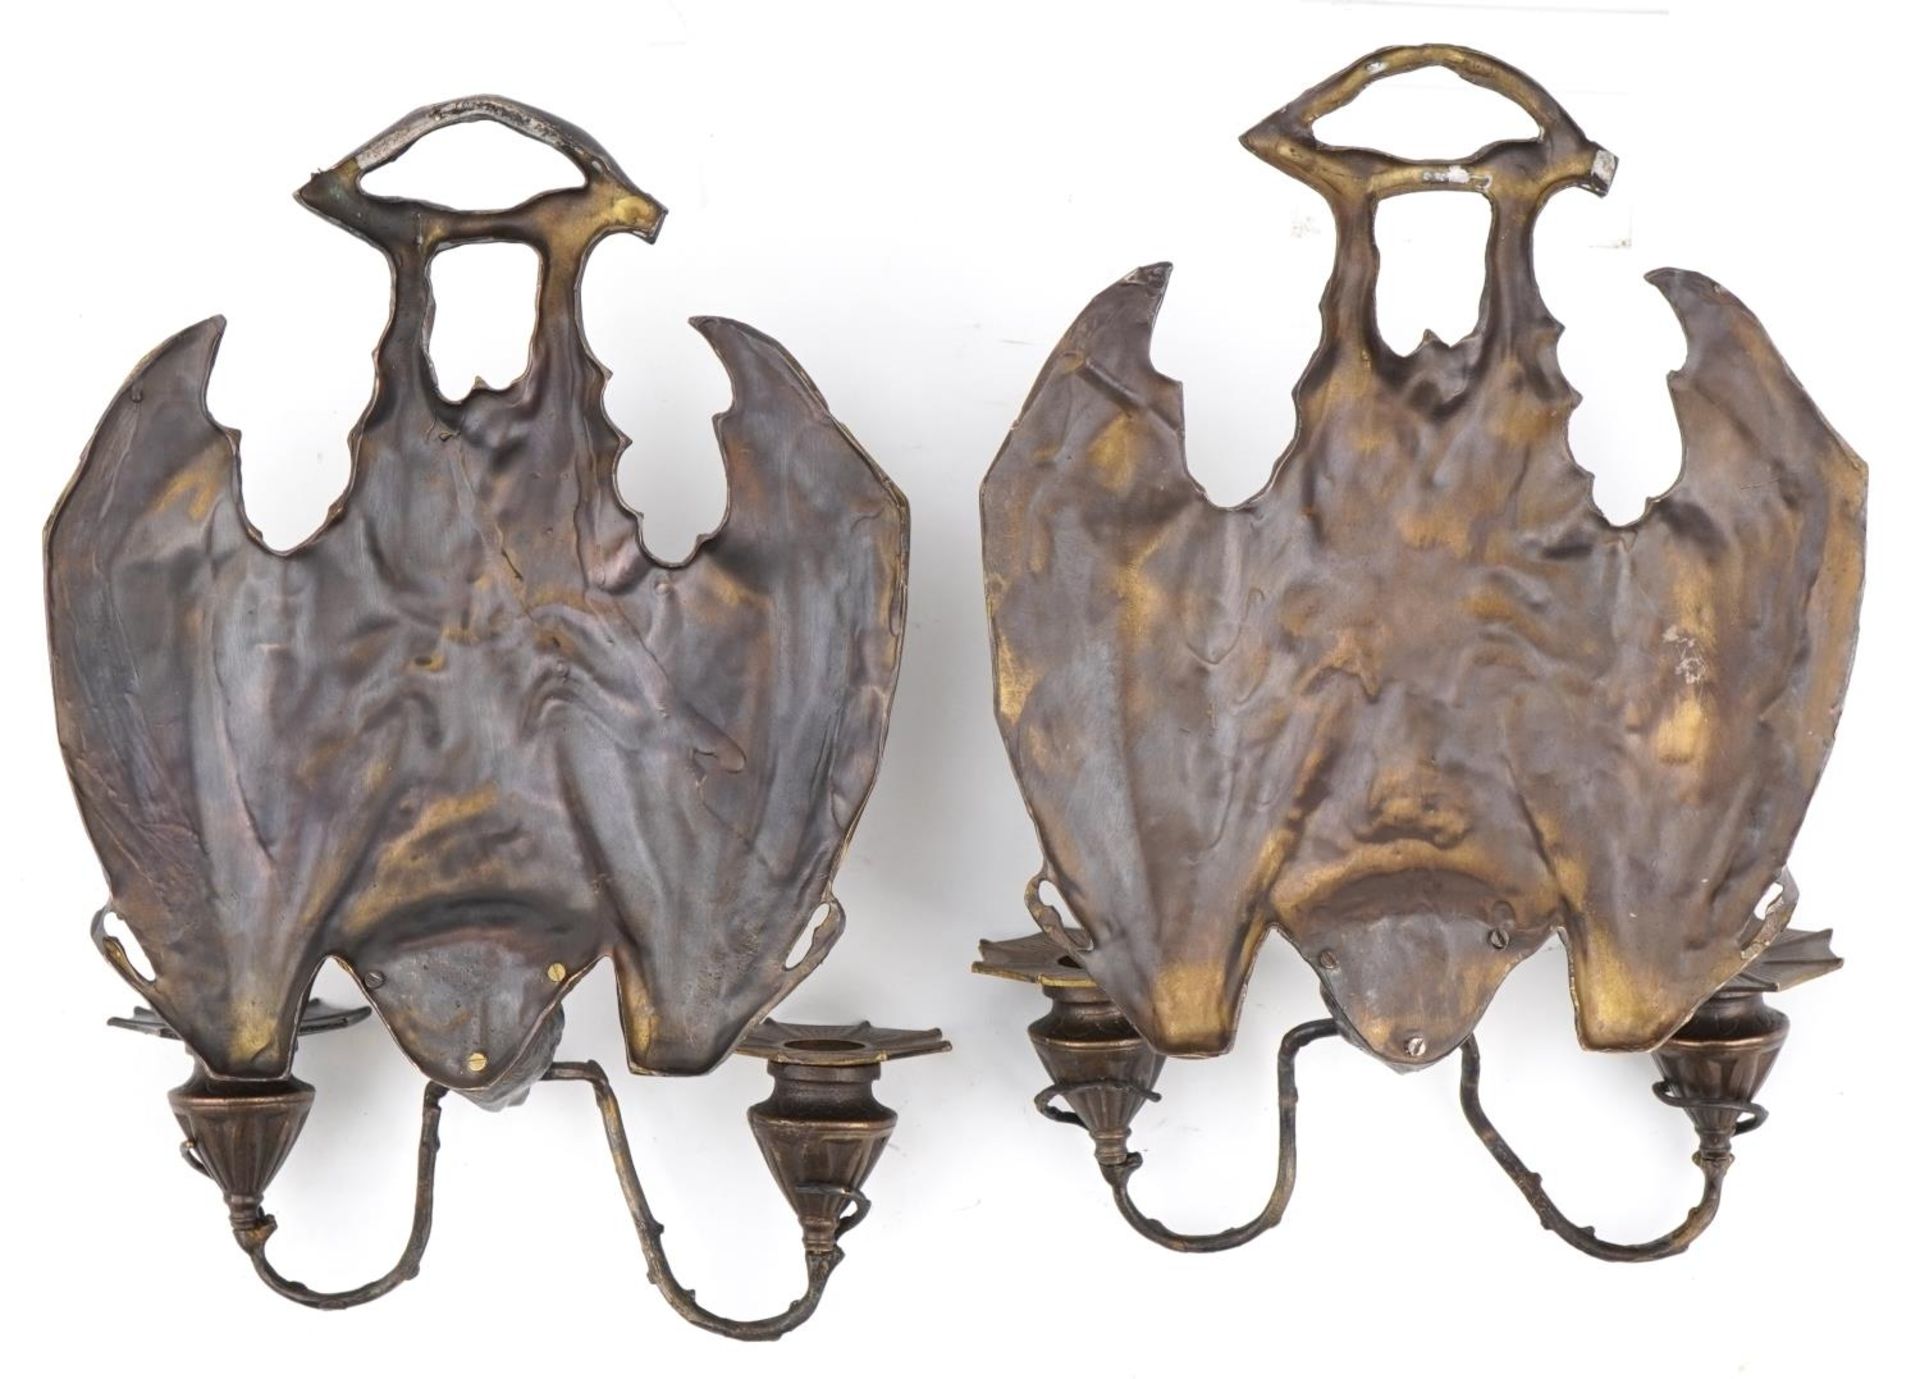 Pair of Art Nouveau style patinated bronze bat design wall sconces, 35cm high : For further - Image 2 of 3